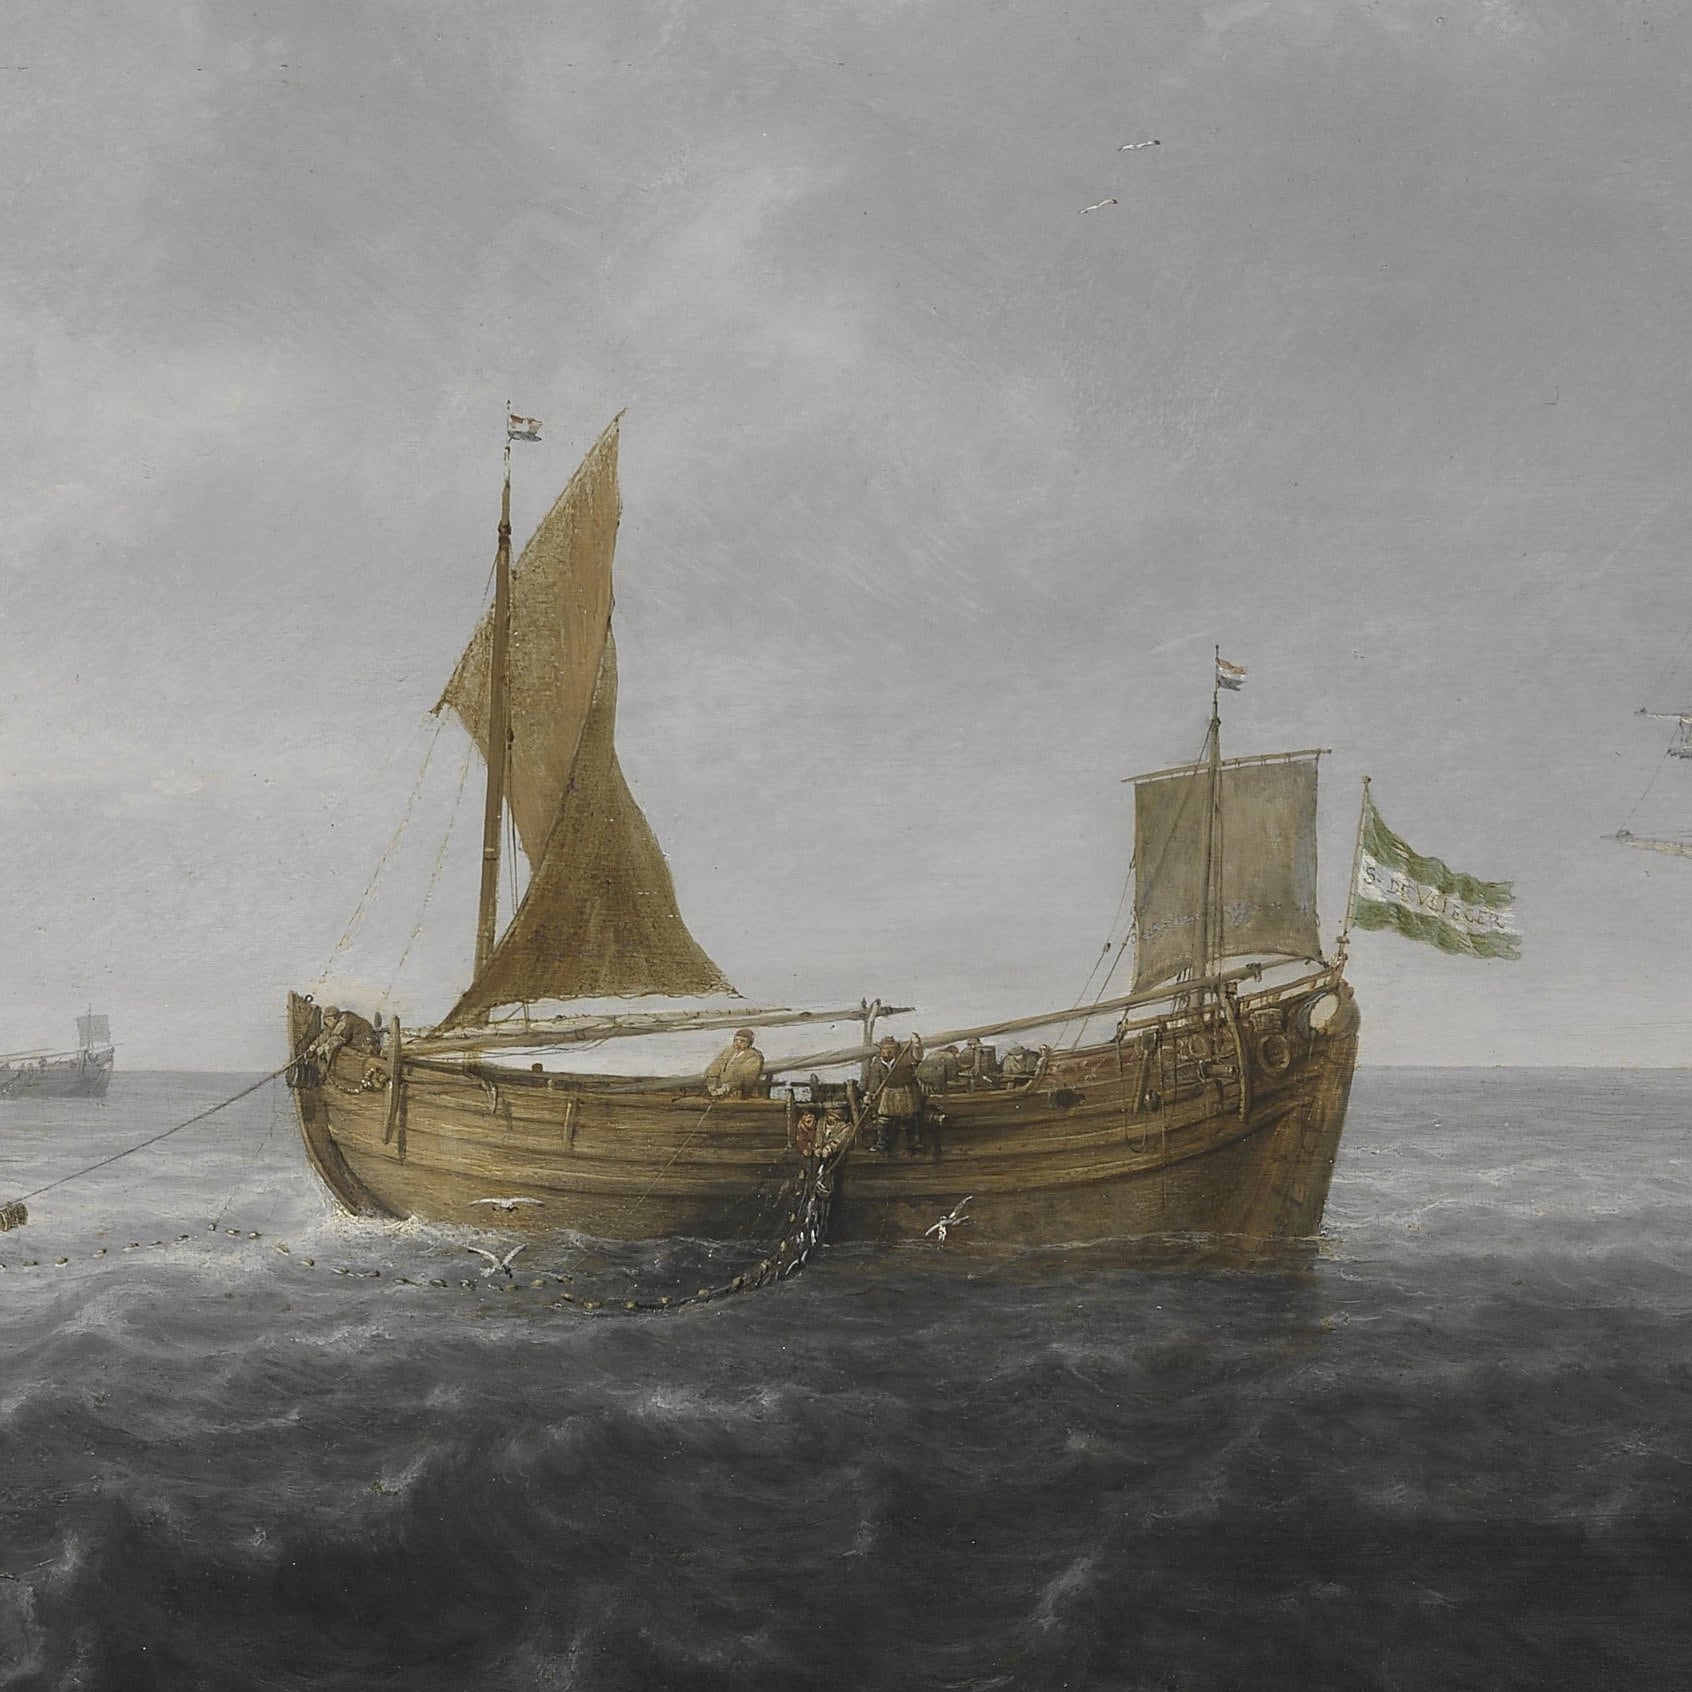 Boats Shooting their Nets by Simon de Vlieger-Dutch, 3d Printed with texture and brush strokes looks like original oil-painting, code:411